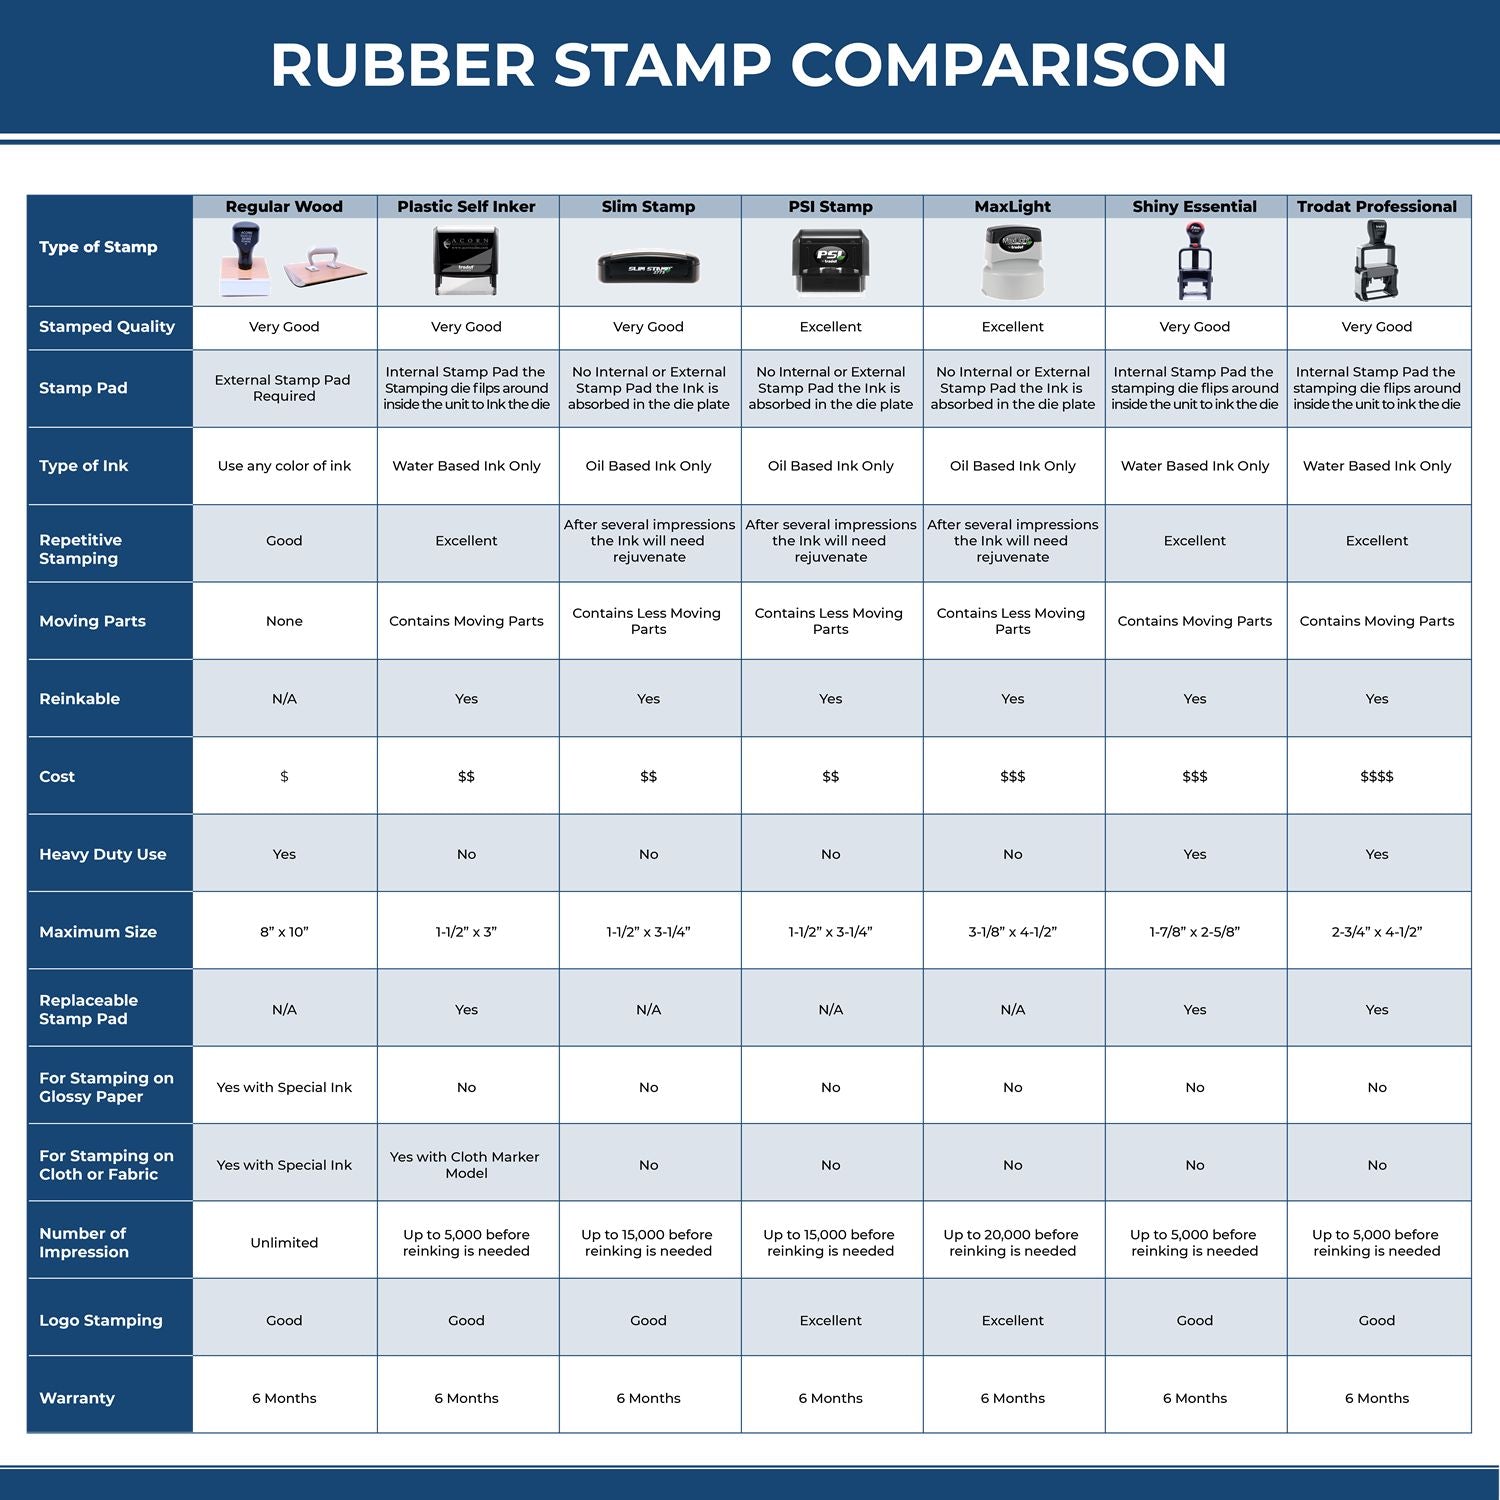 A comparison chart for the different types of mount models available for the Premium MaxLight Pre-Inked New Mexico Engineering Stamp.